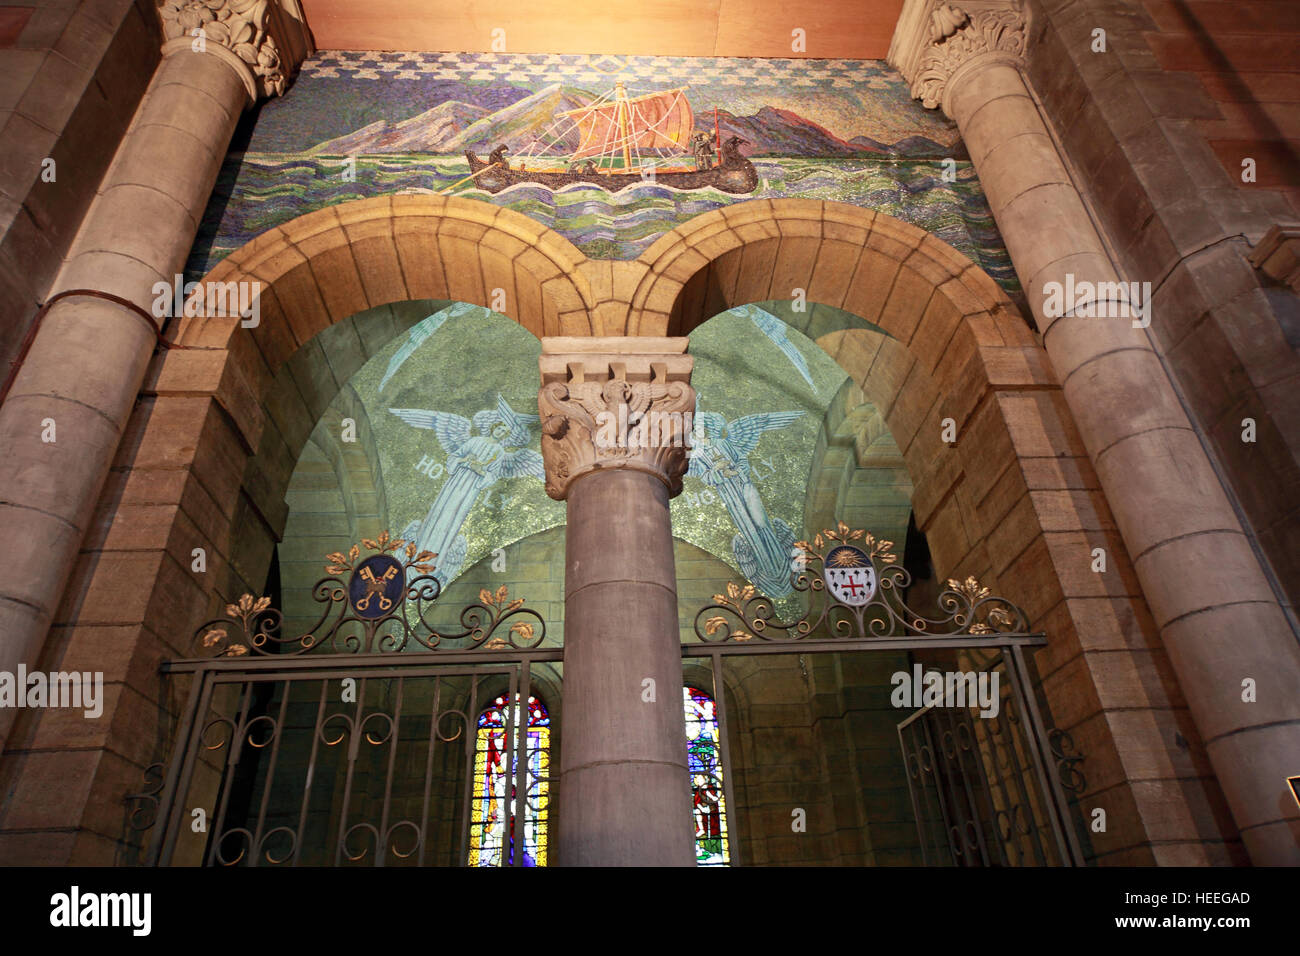 St Annes Belfast Cathedral Interior,ship on archway gate Stock Photo